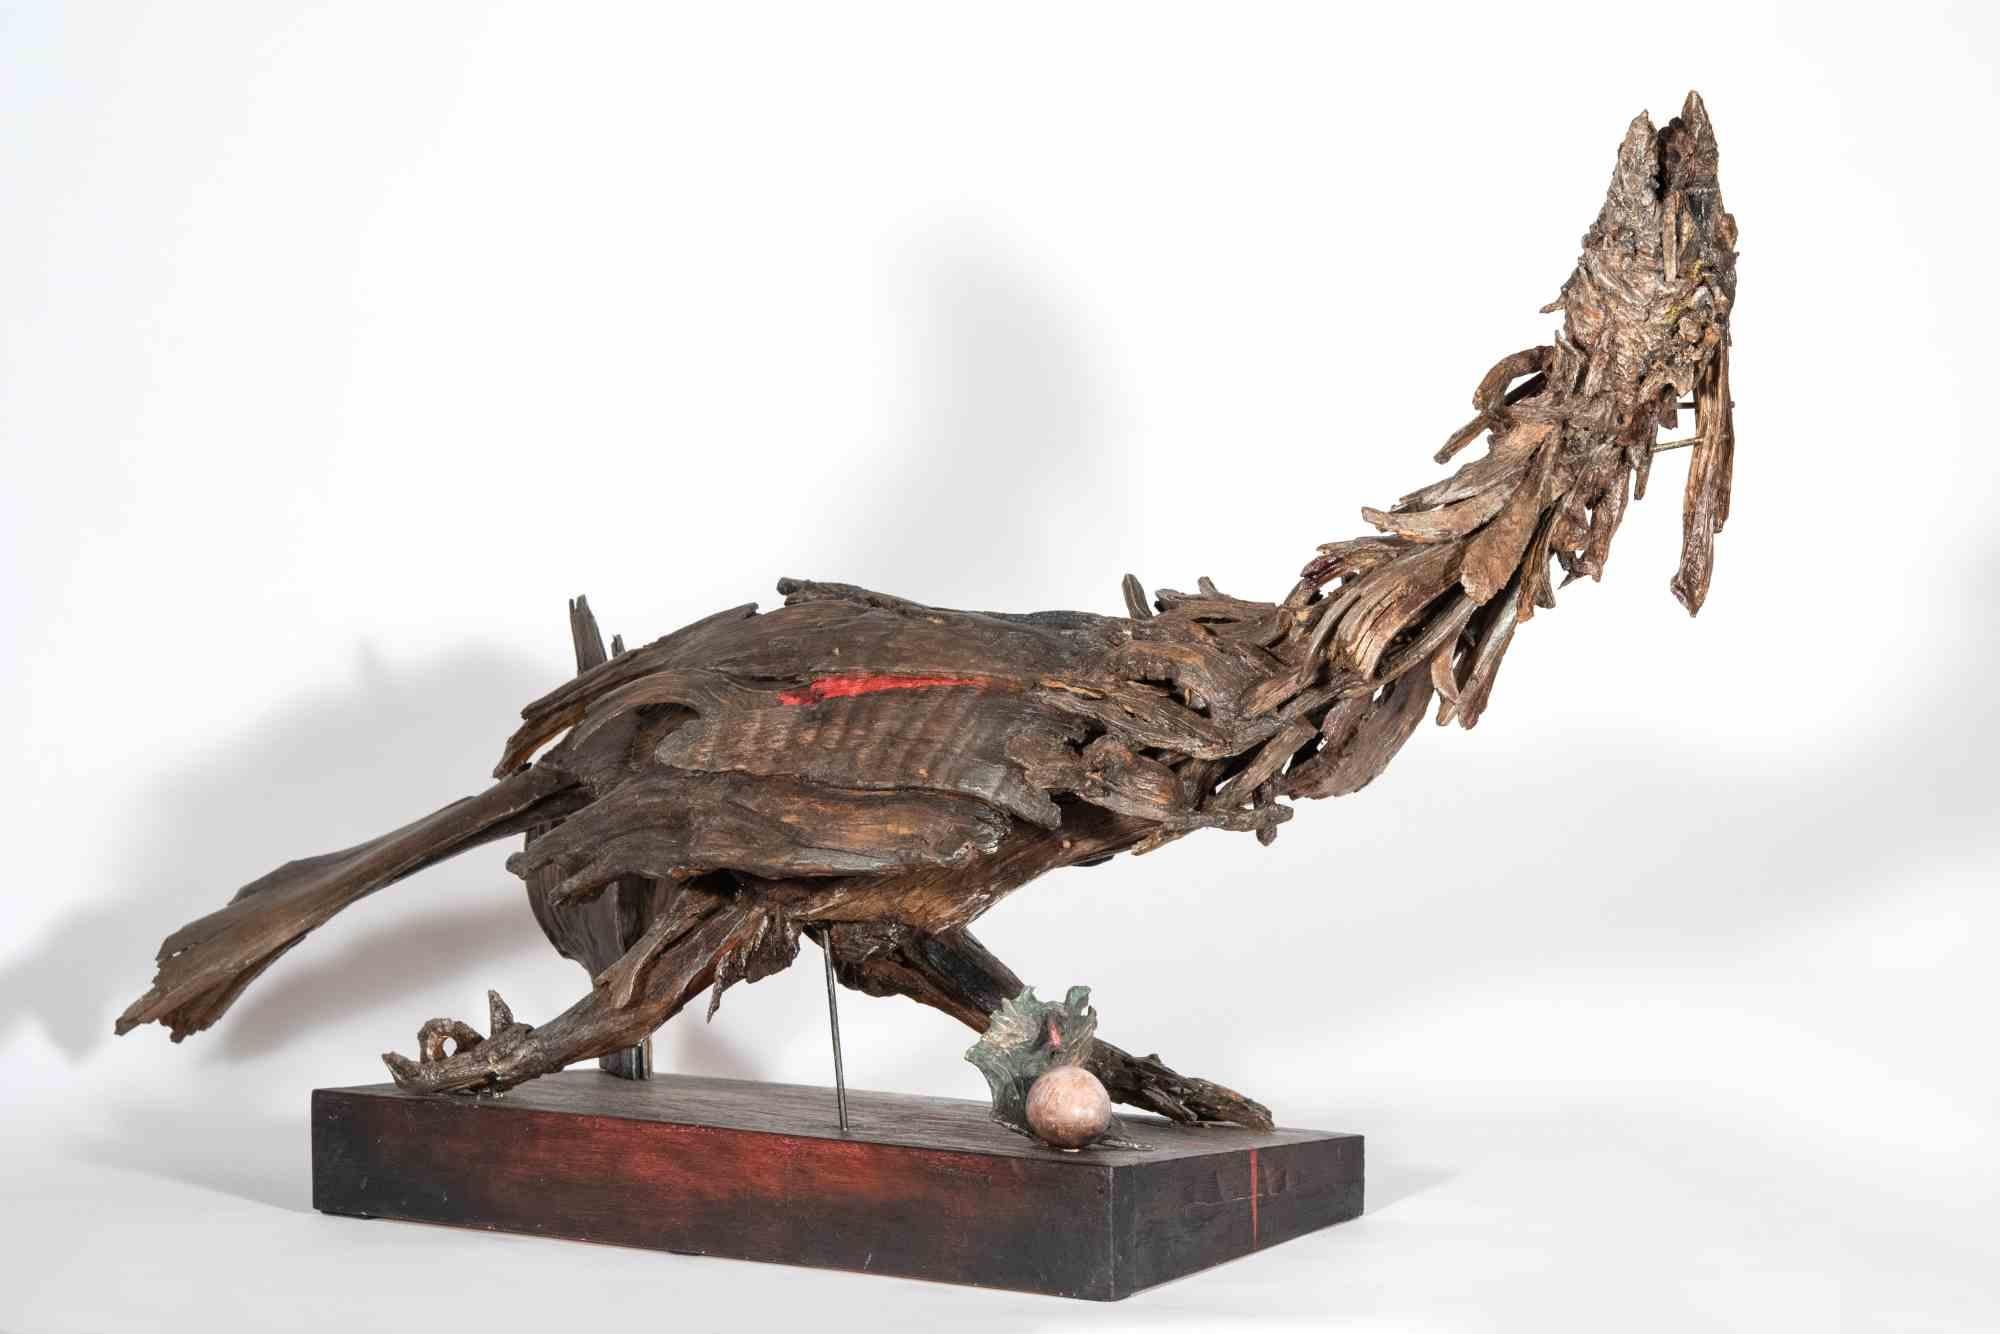 Intense Sculpture, in Excellent condition, created in wood by Sculptor Lorenzo Servalli to enlighten, in the year 2000, the most Sensitive and Delicate Souls on the theme of Wounded Nature, increasingly threatened and attacked by insane human greed